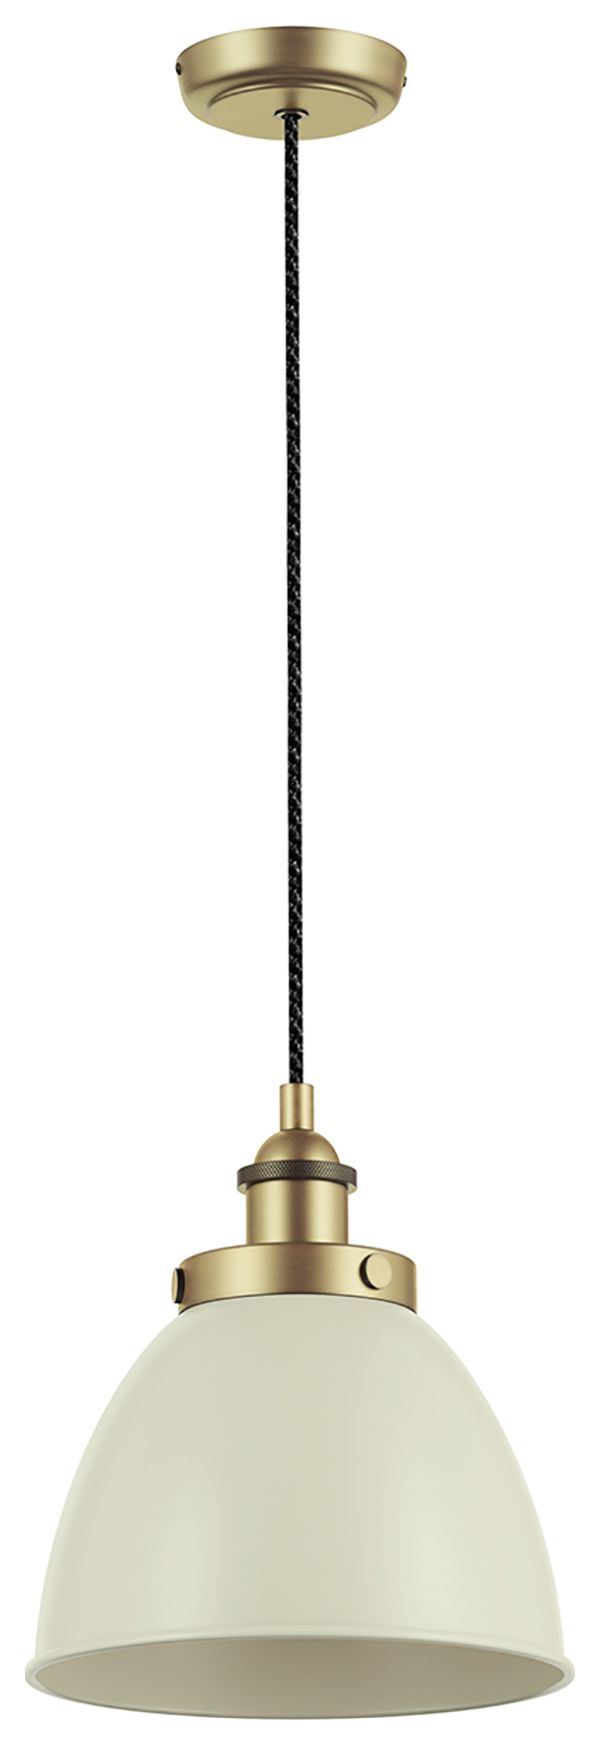 Franklin Pendant Light Taupe and Brass